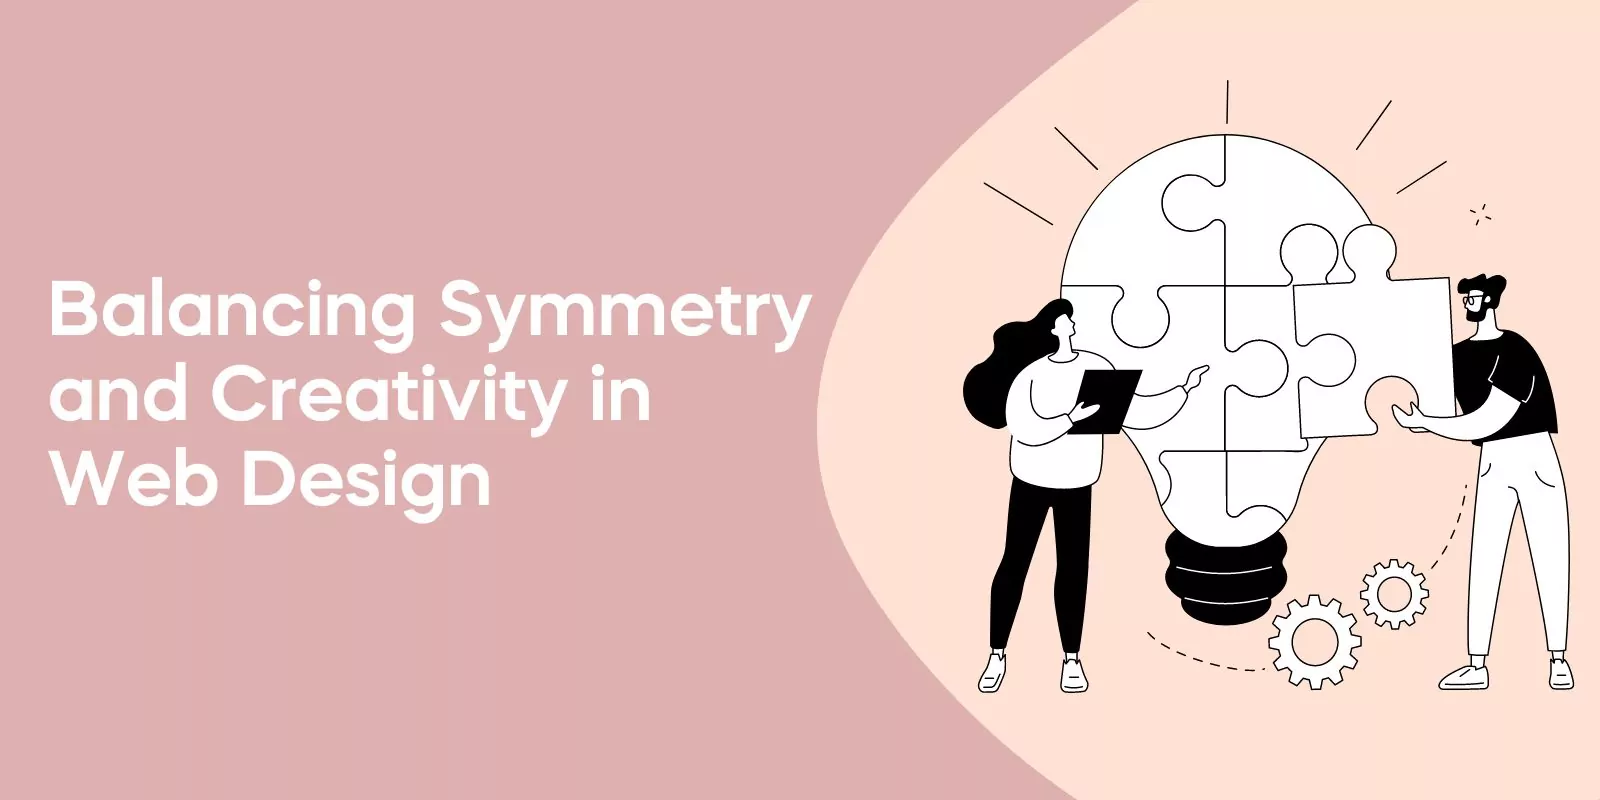 Balancing Symmetry and Creativity in Web Design